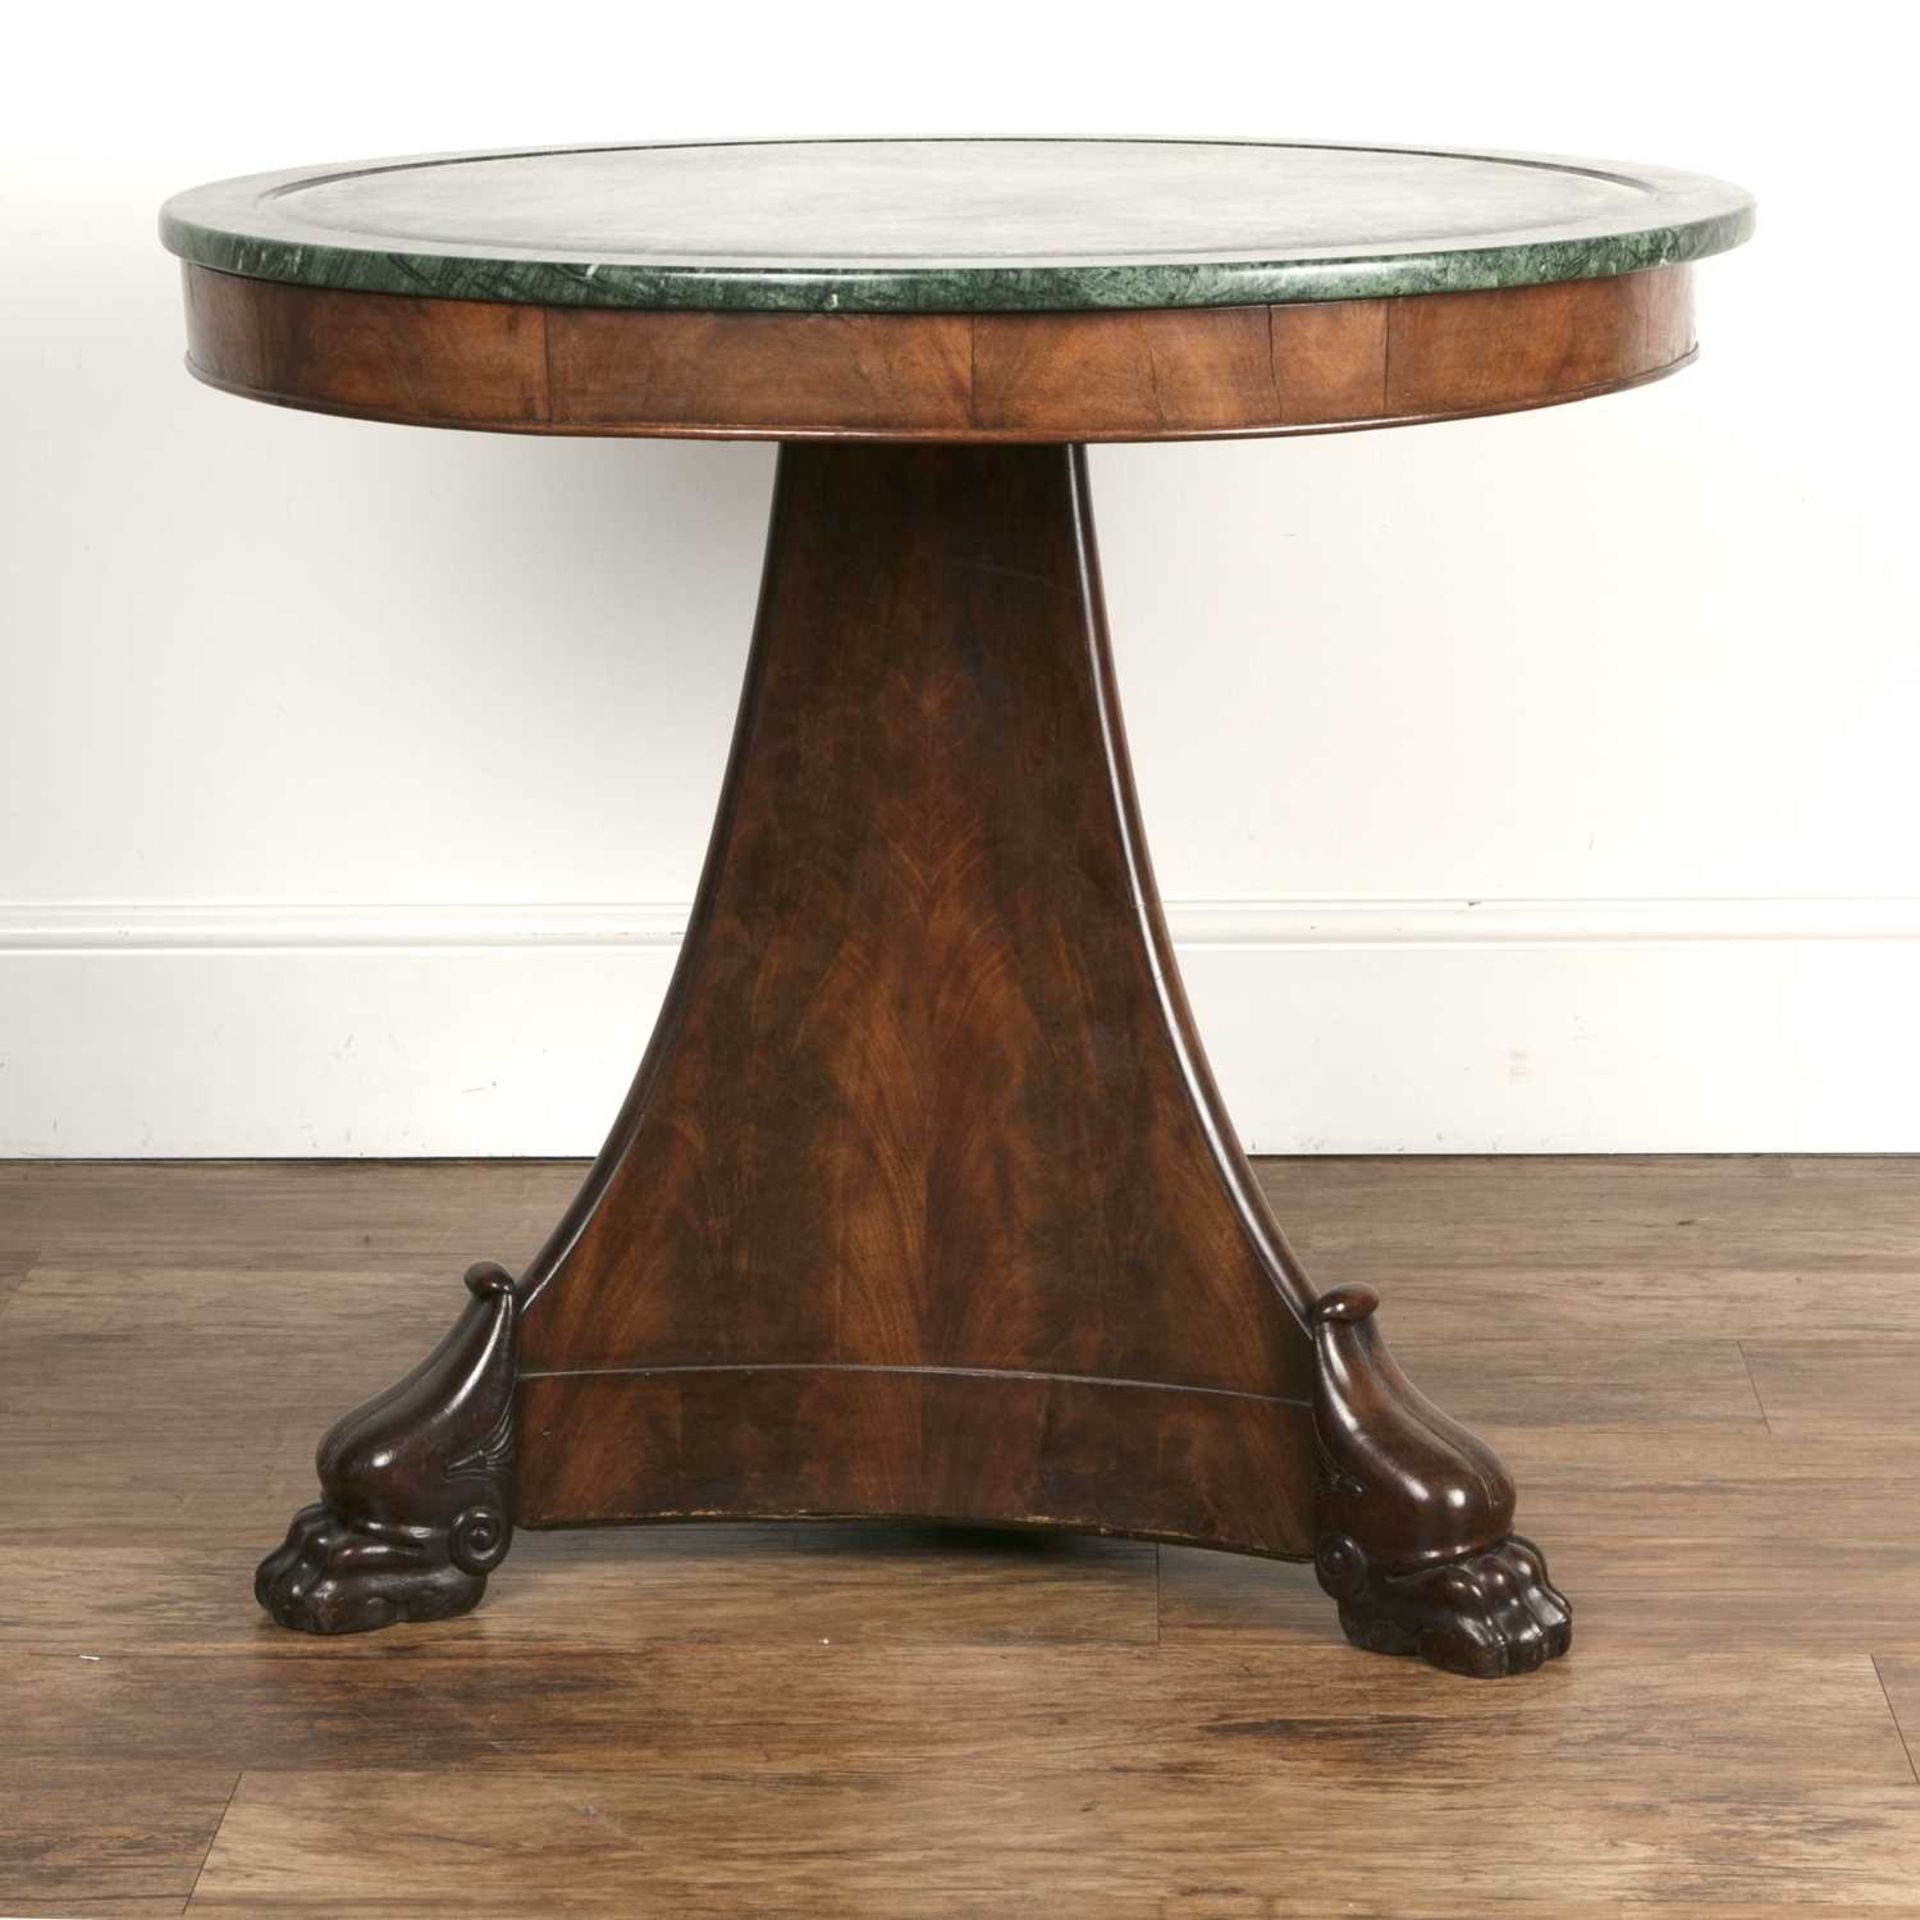 Mahogany centre or library table With a later green marble top, a triform base, and claw feet, 83. - Image 3 of 4